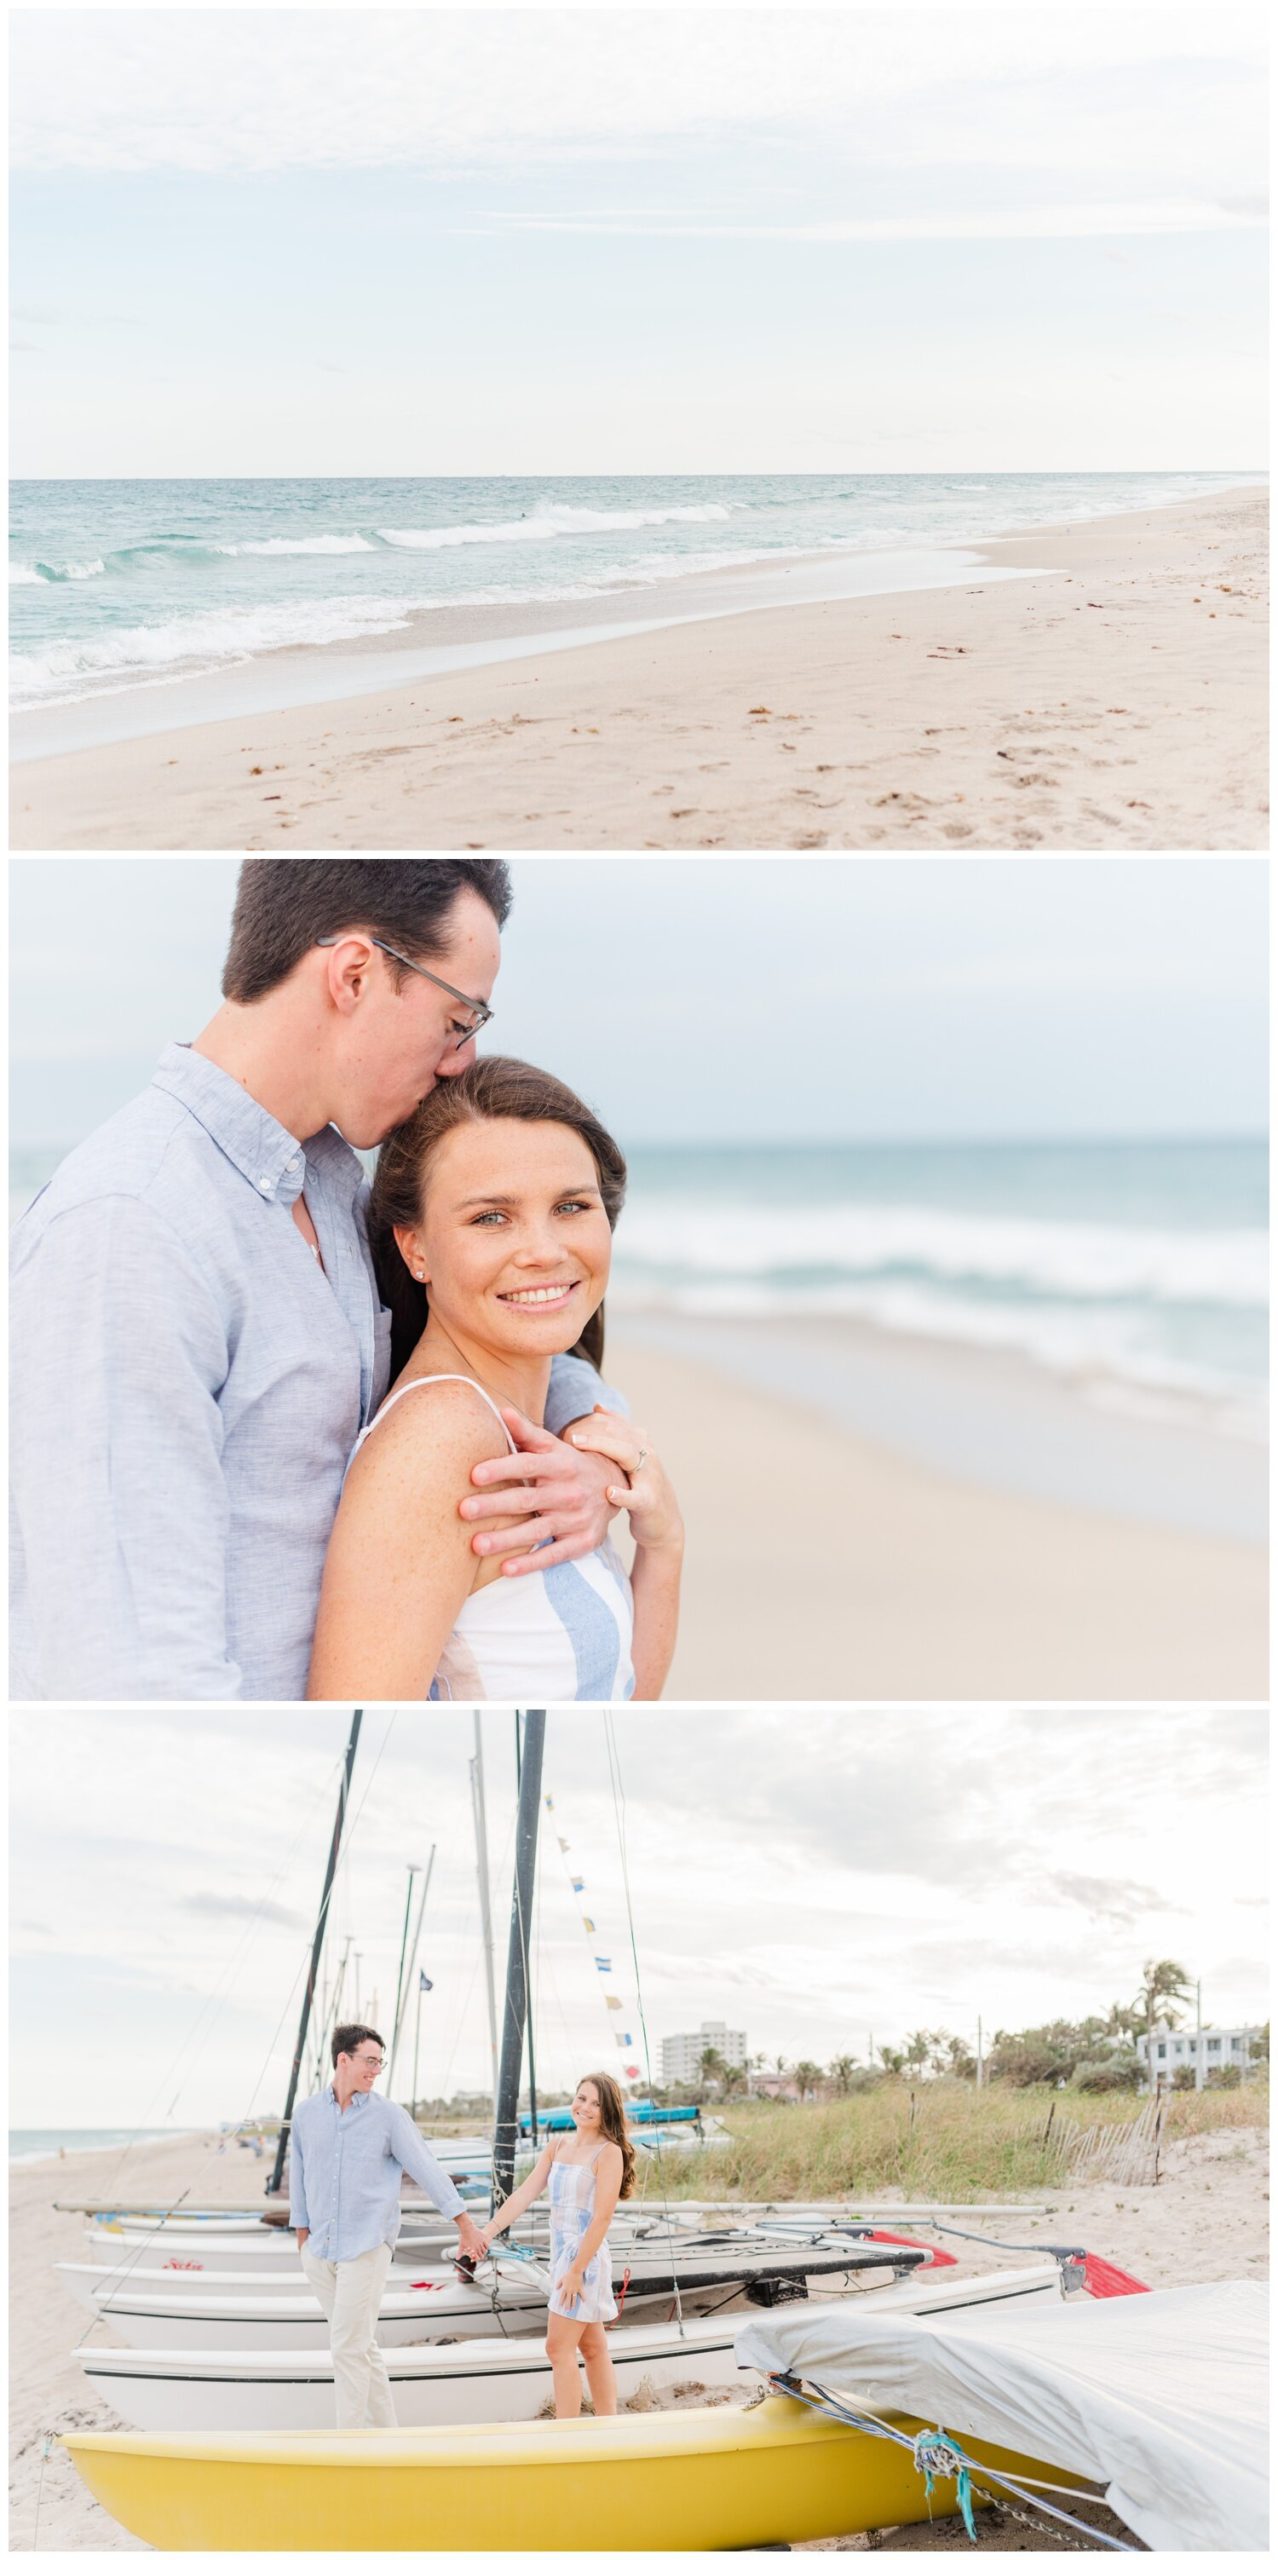 CMageePhotography_DelrayBeach_Engagement_2021_0004.jpg